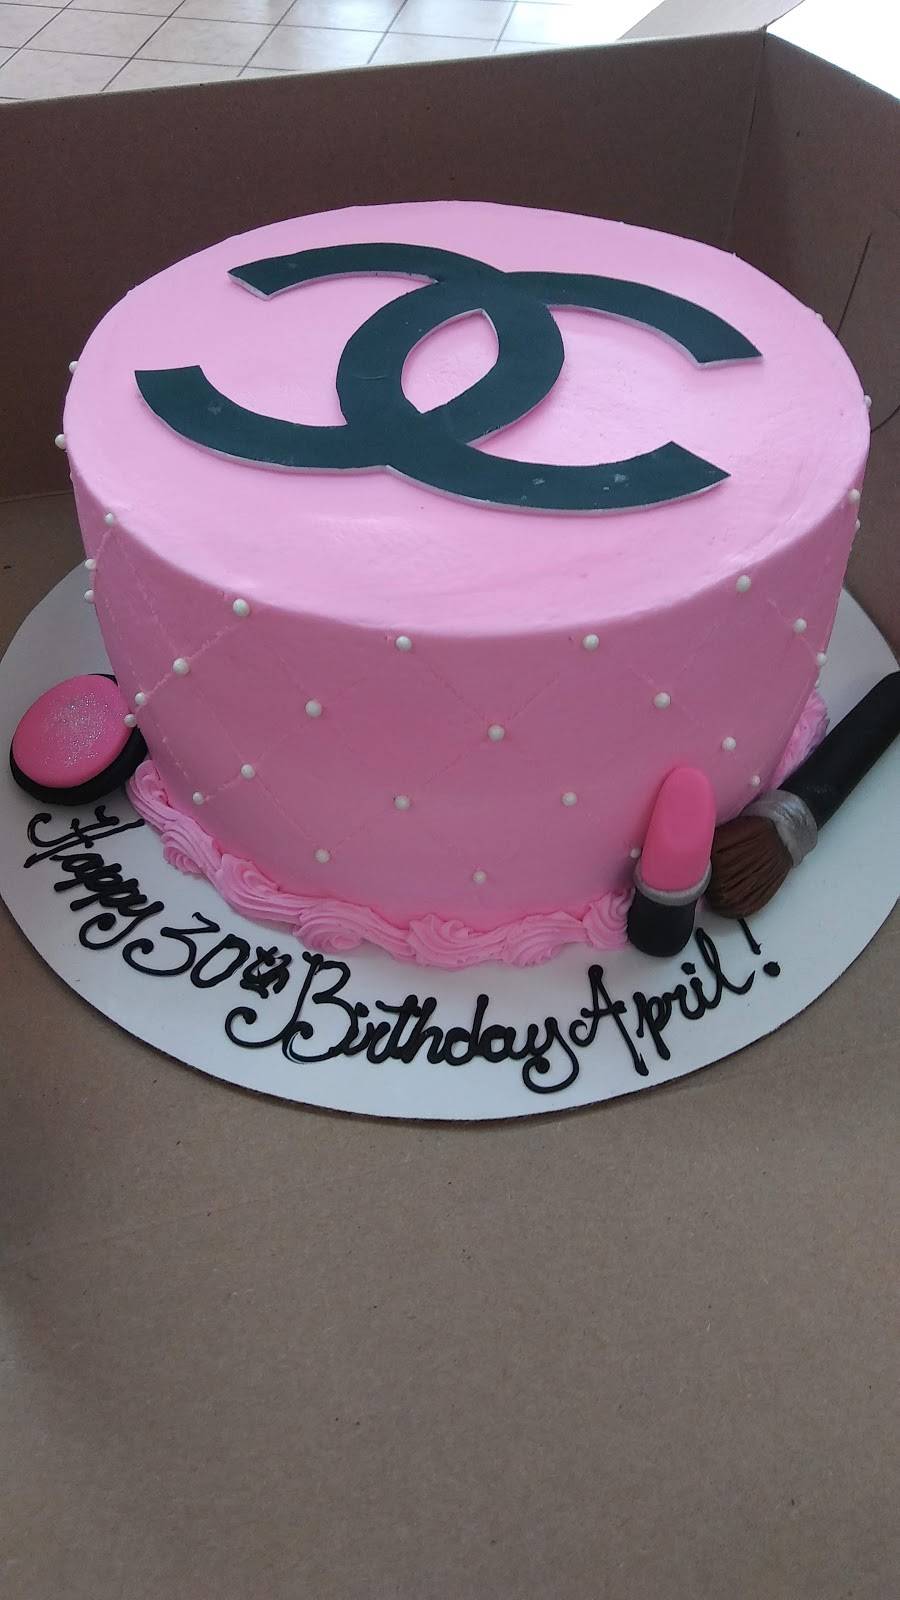 Cakes By Karen | 9797 East, W Colfax Ave, Lakewood, CO 80215, USA | Phone: (303) 234-1919